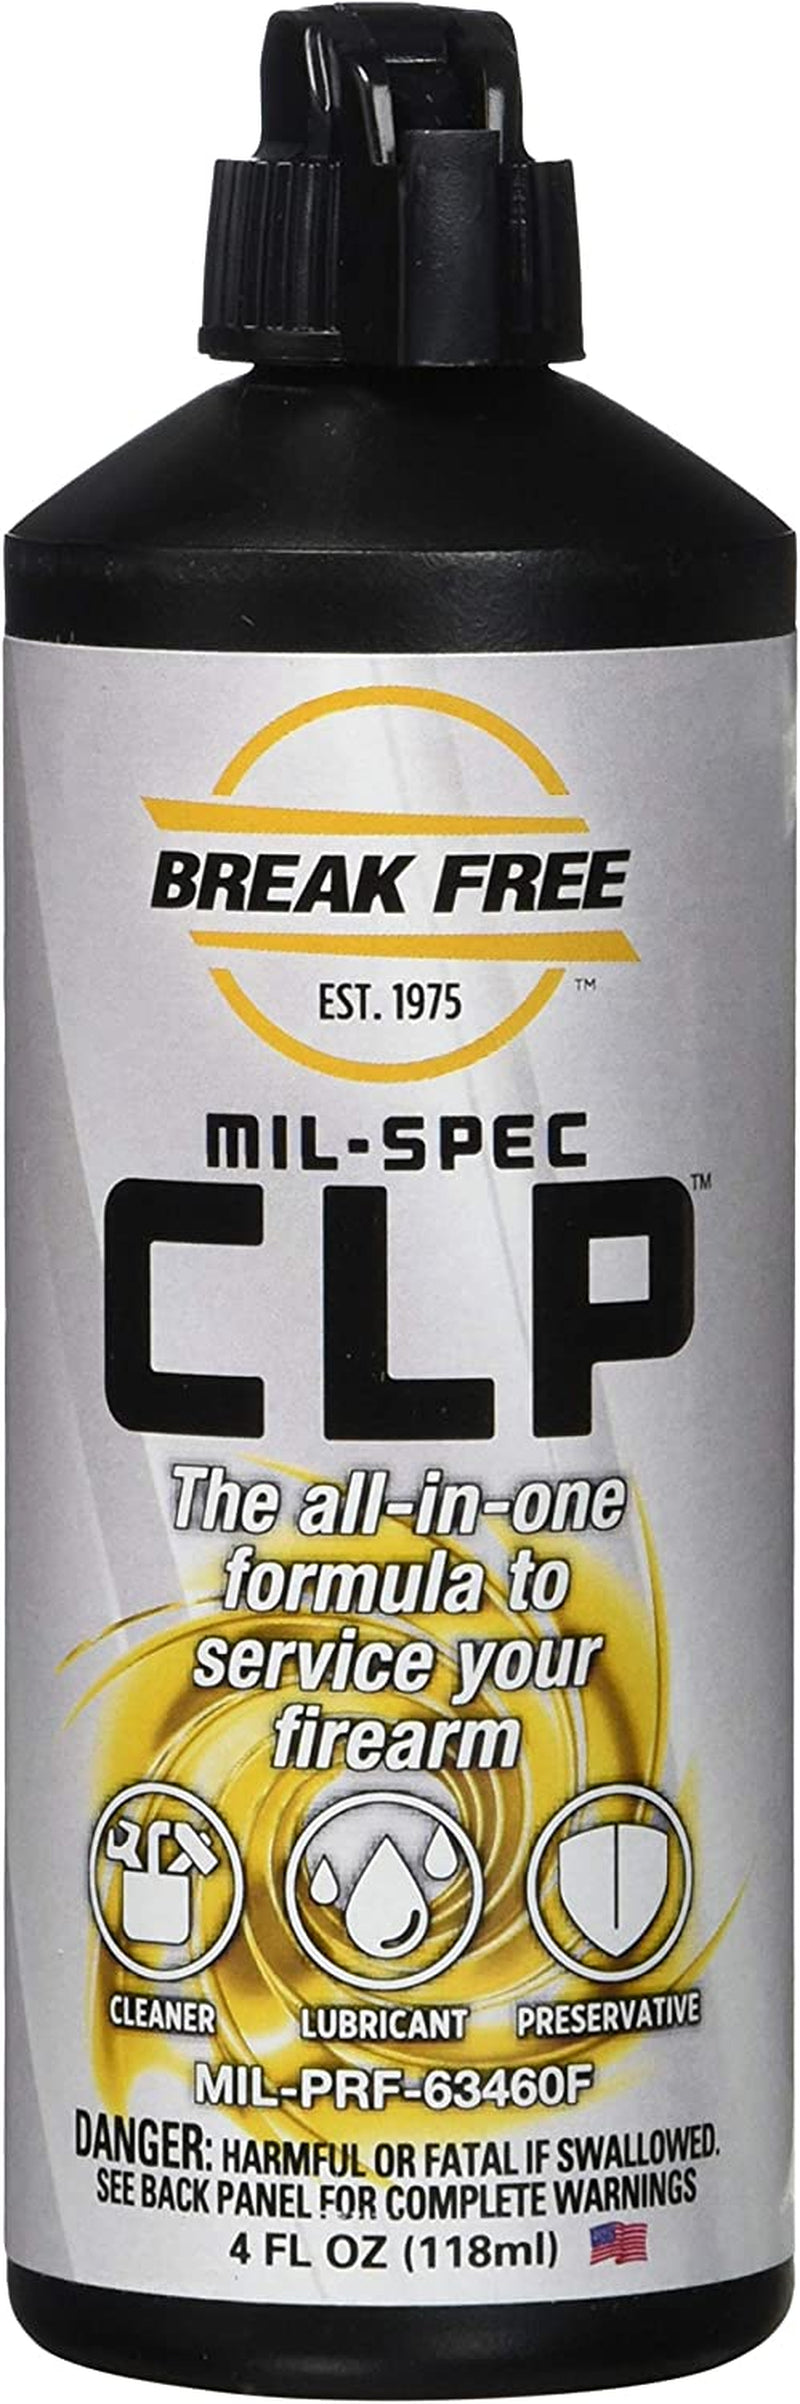 Breakfree CLP-4 Cleaner Lubricant Preservative Squeeze Bottle